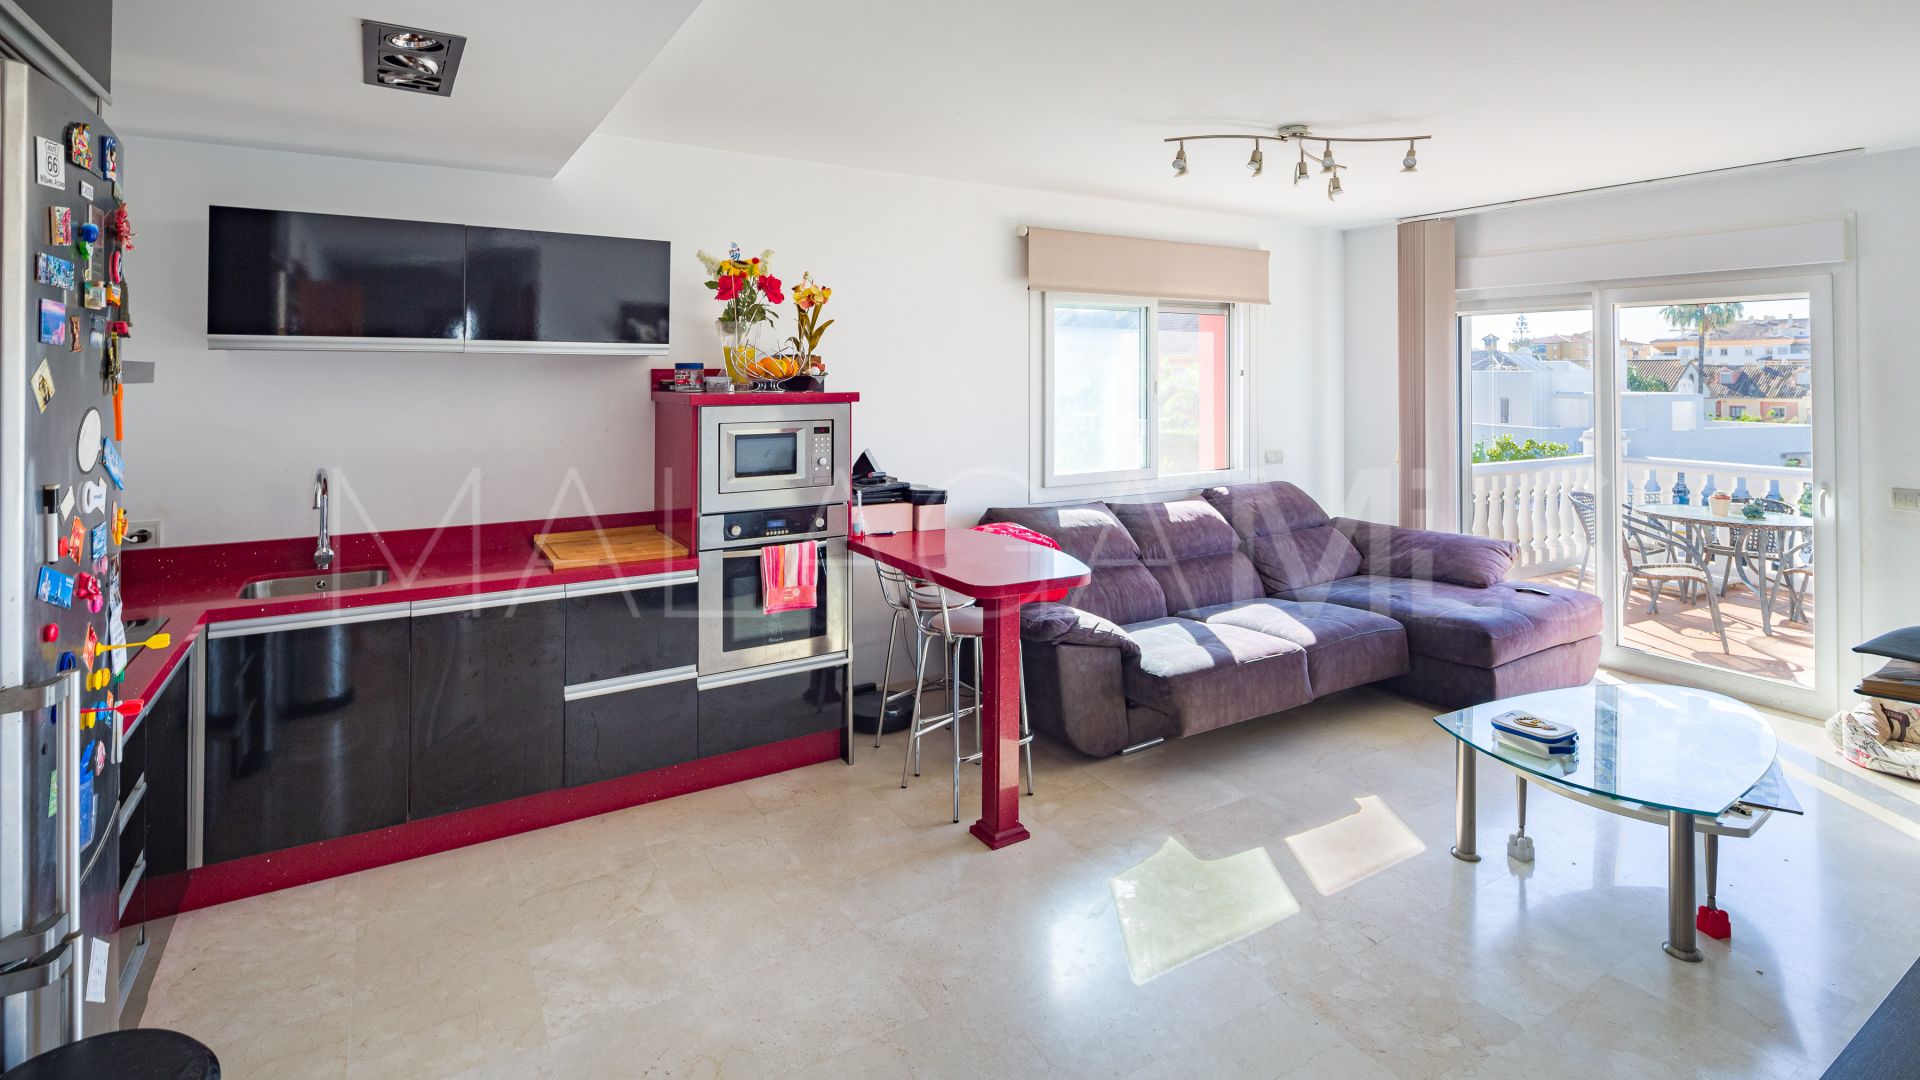 For sale villa in S. Pedro Centro with 6 bedrooms